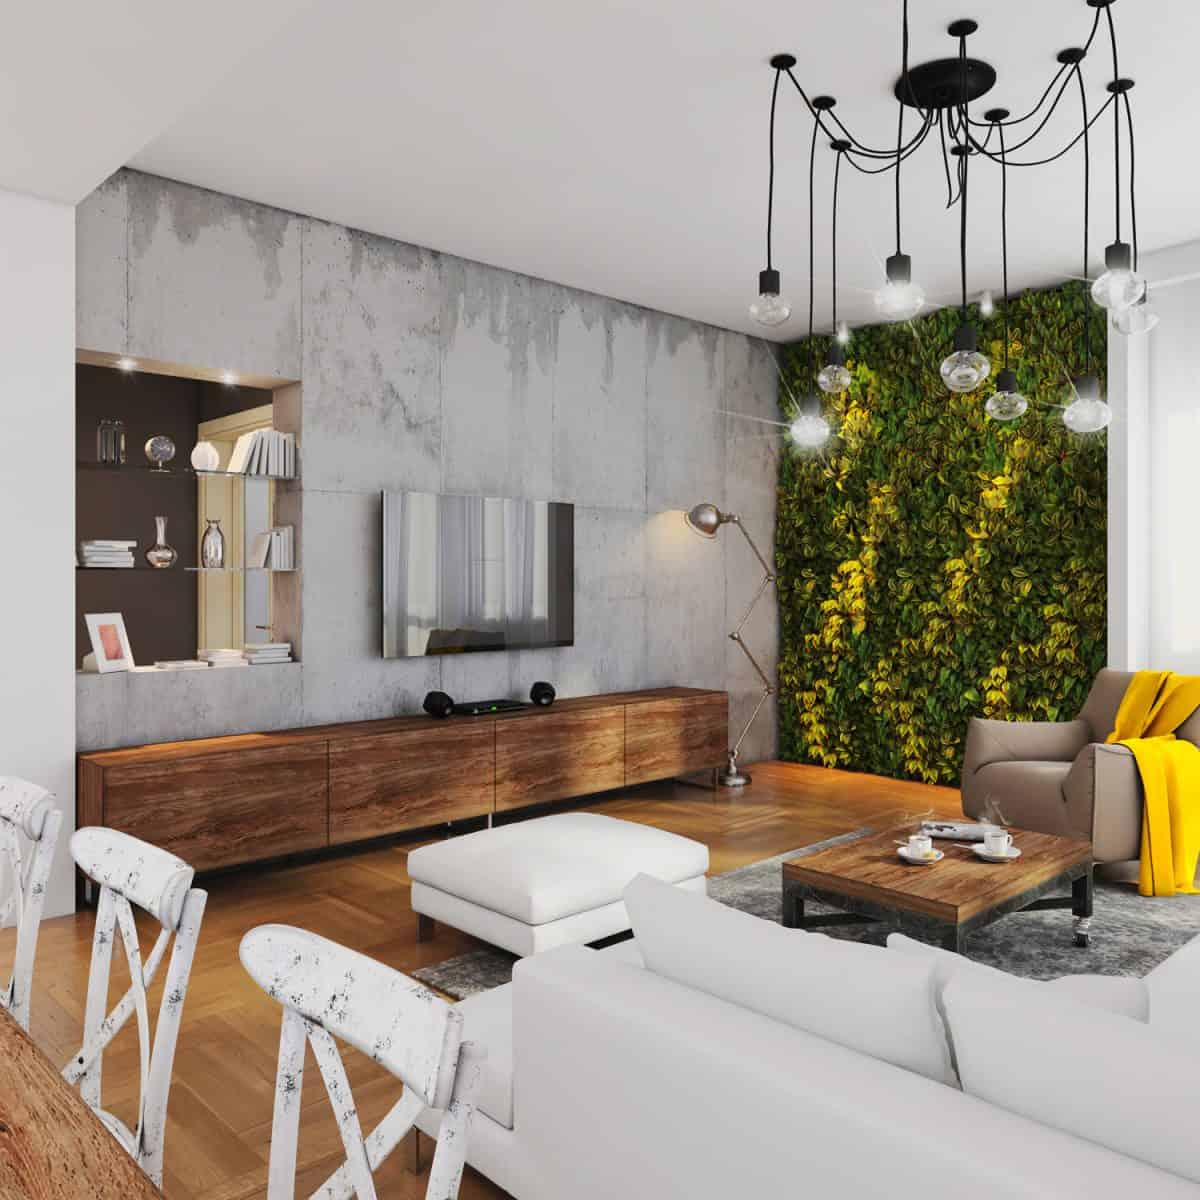 Modern hipster apartment interior. Open space loft, living room with dining room and kitchen in the back.